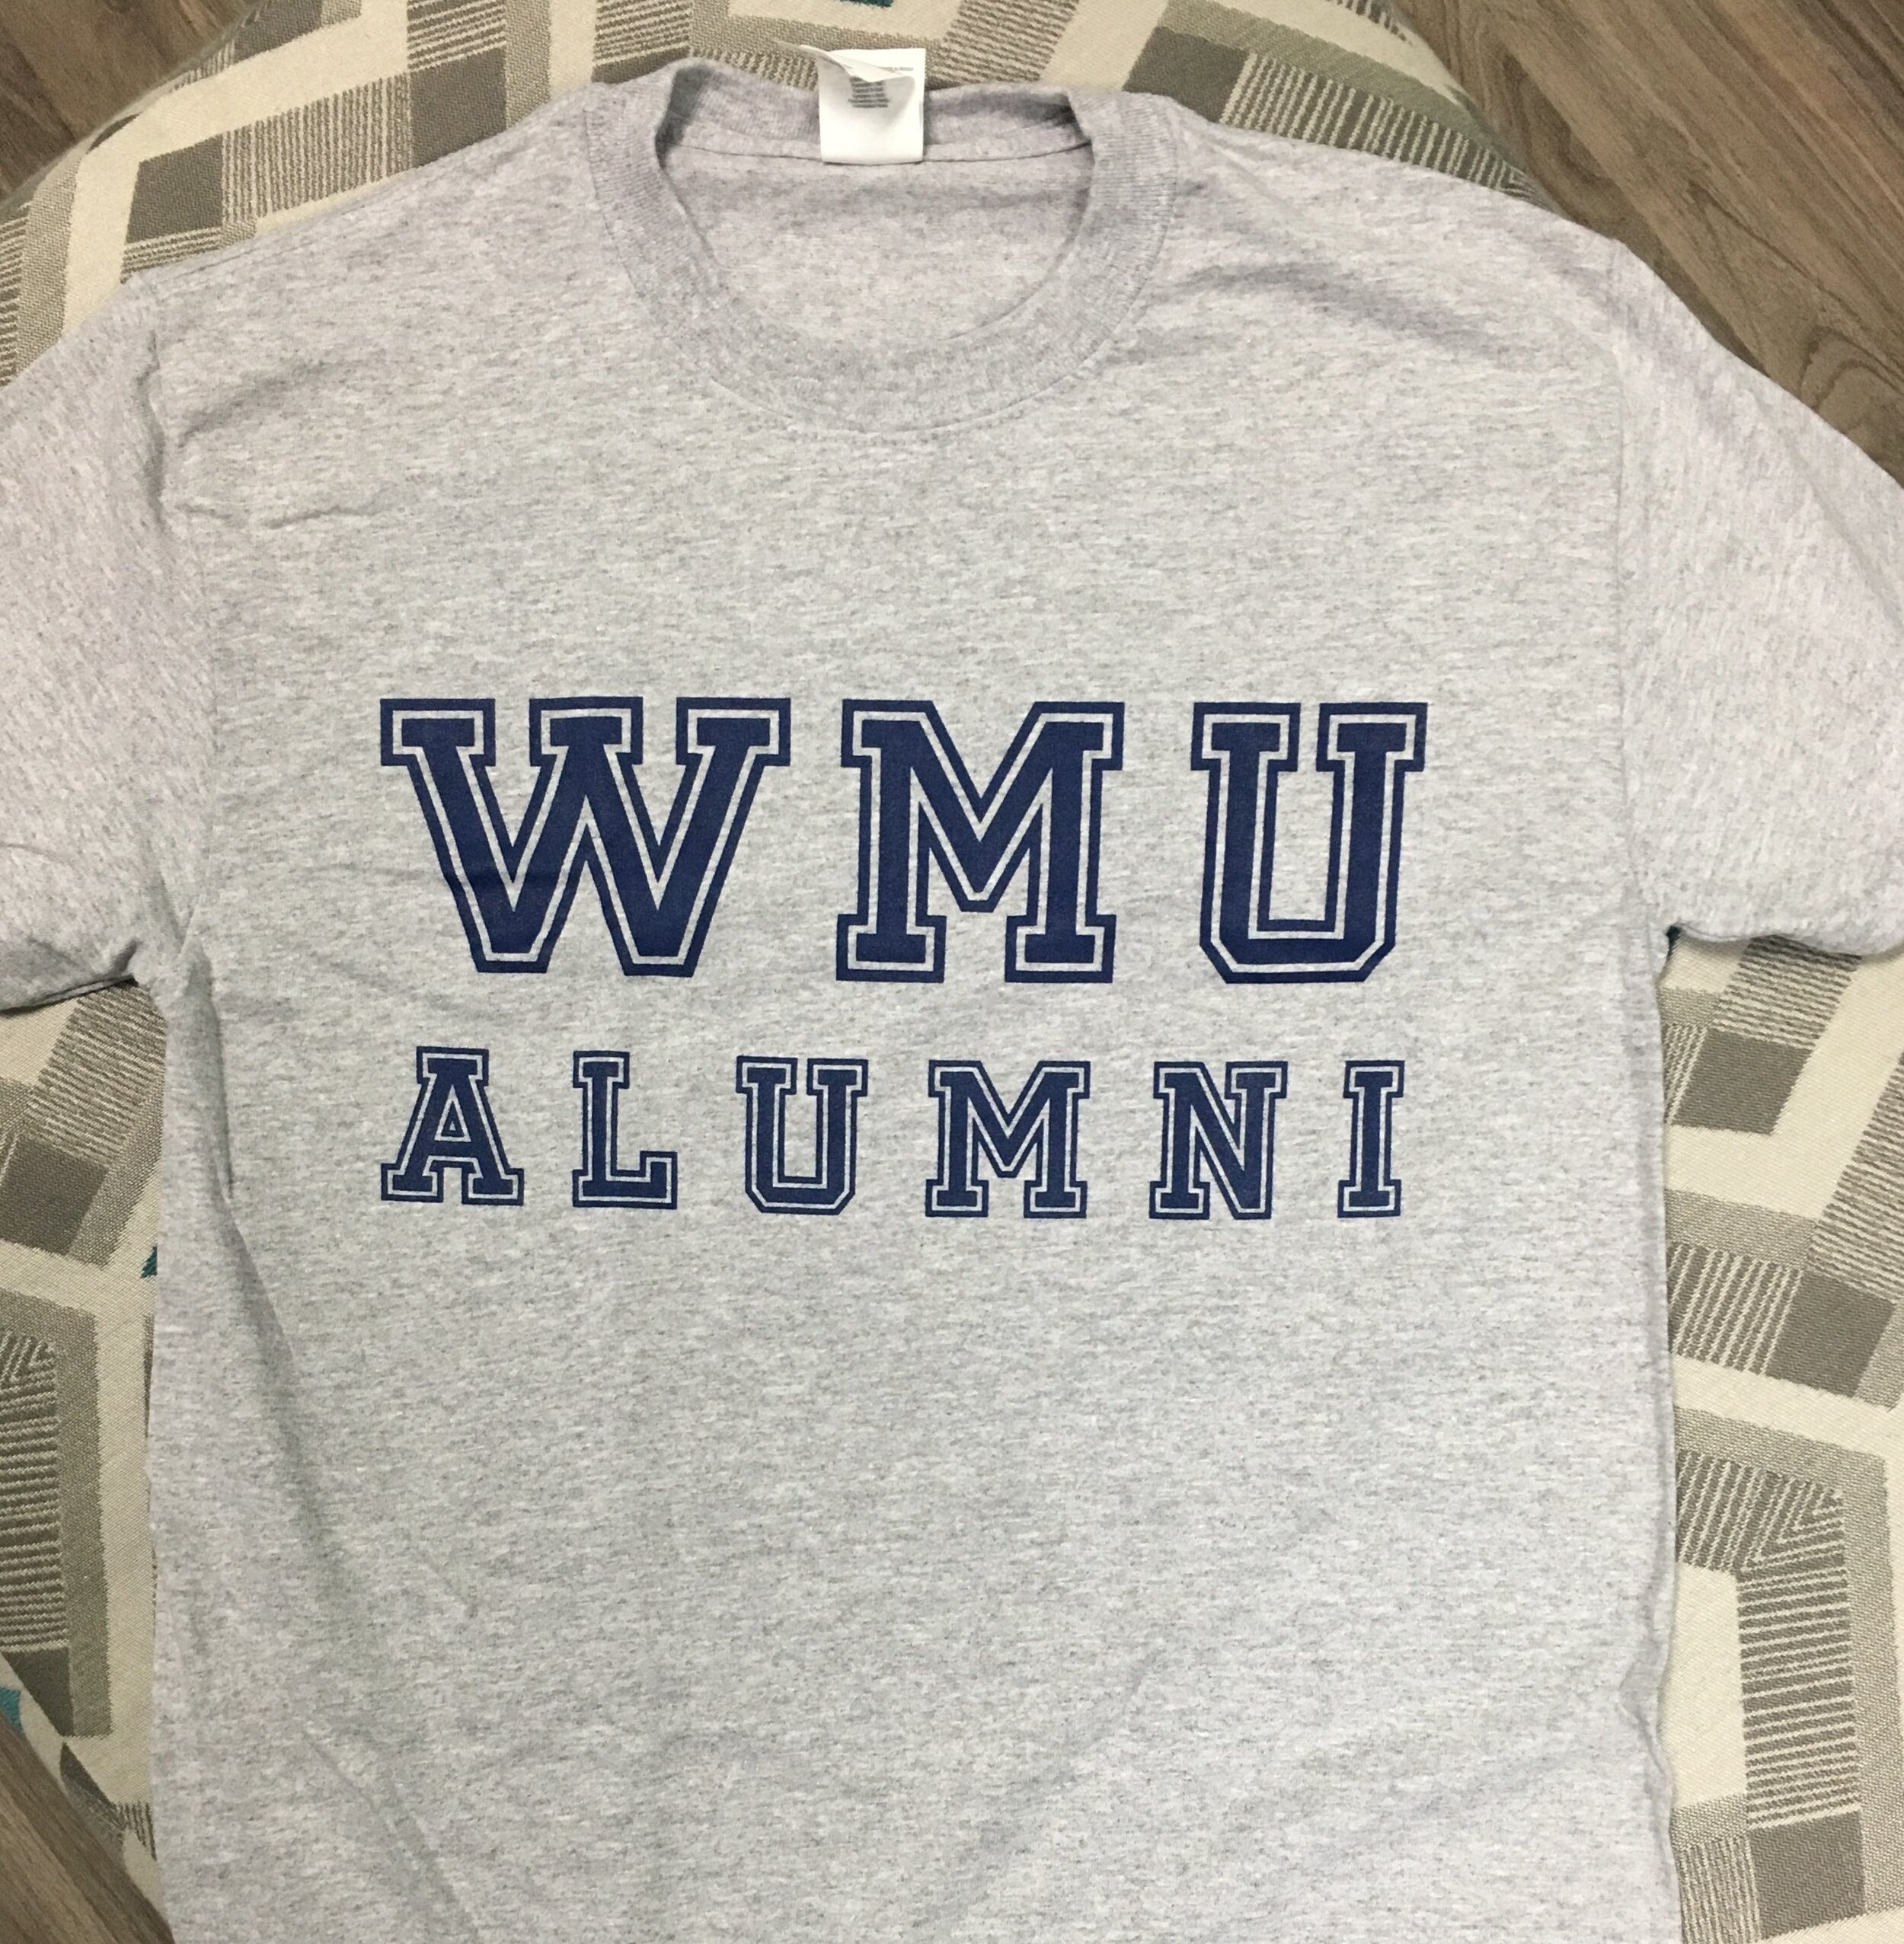 Have you received a scholarship from national WMU or the WMU Foundation in the past? Visit wmufoundation.com/scholarshipalumni to join the WMU/WMU Foundation Scholarship Alumni Society and receive a free T-shirt!